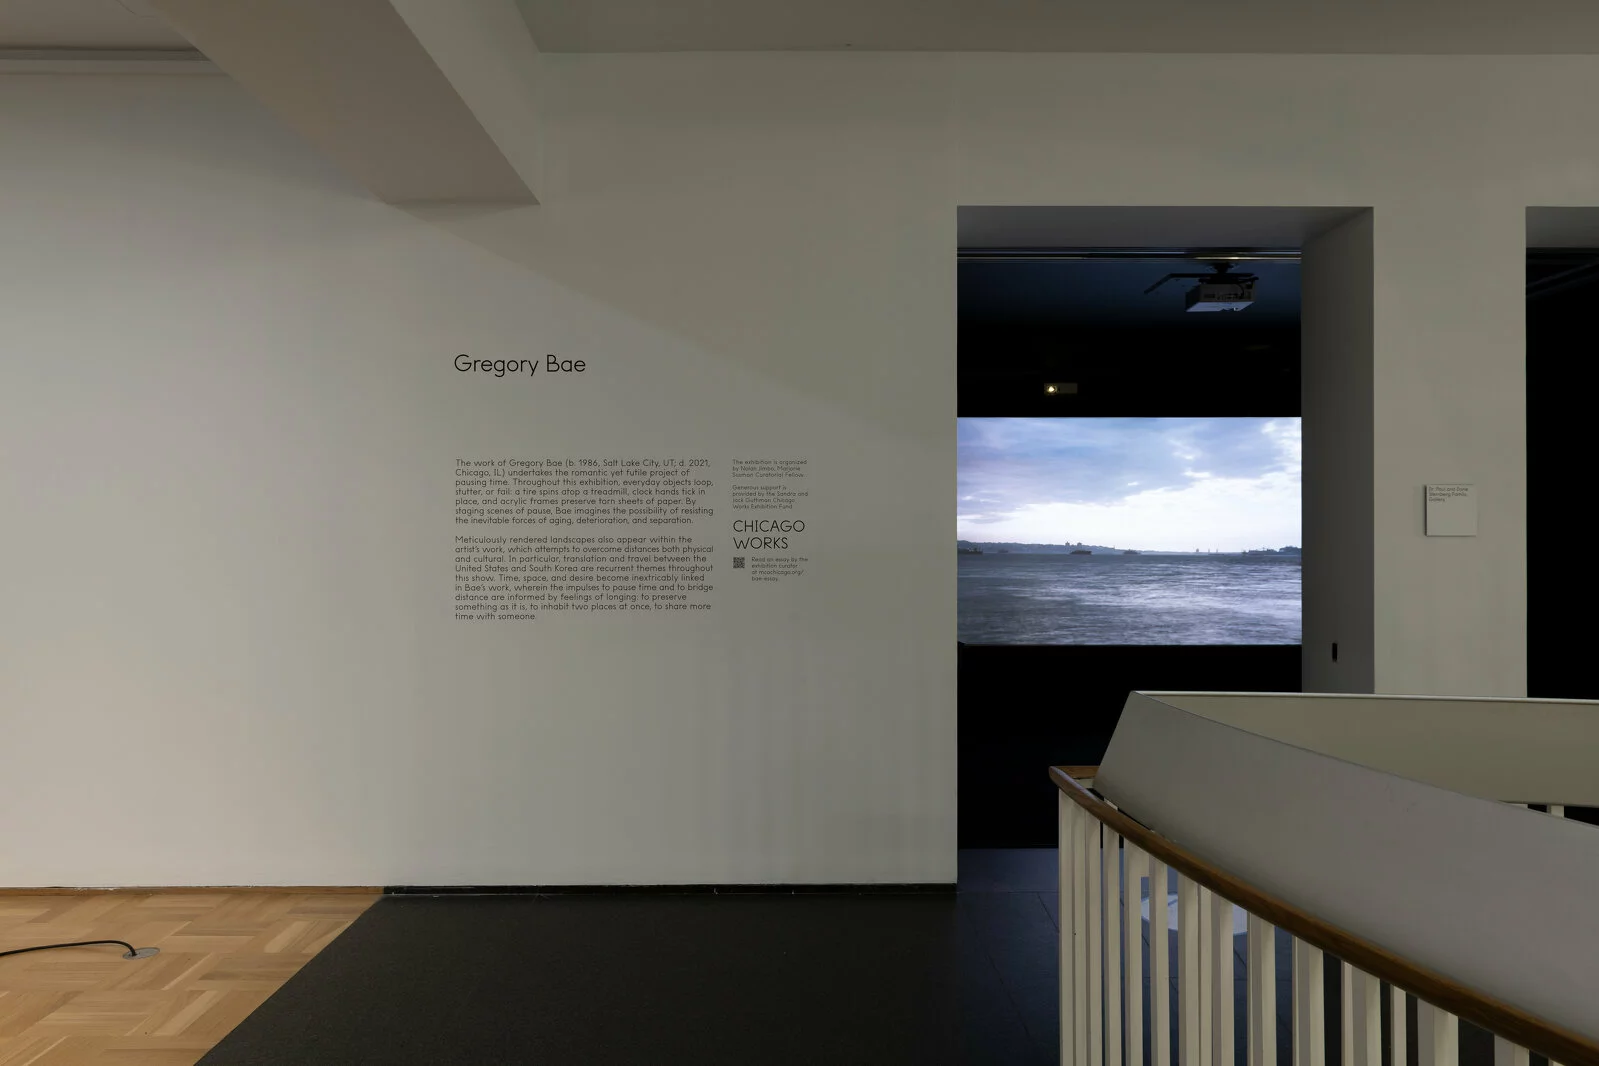 Gallery space with open doorway leading into darkened room with video artwork partially seen.